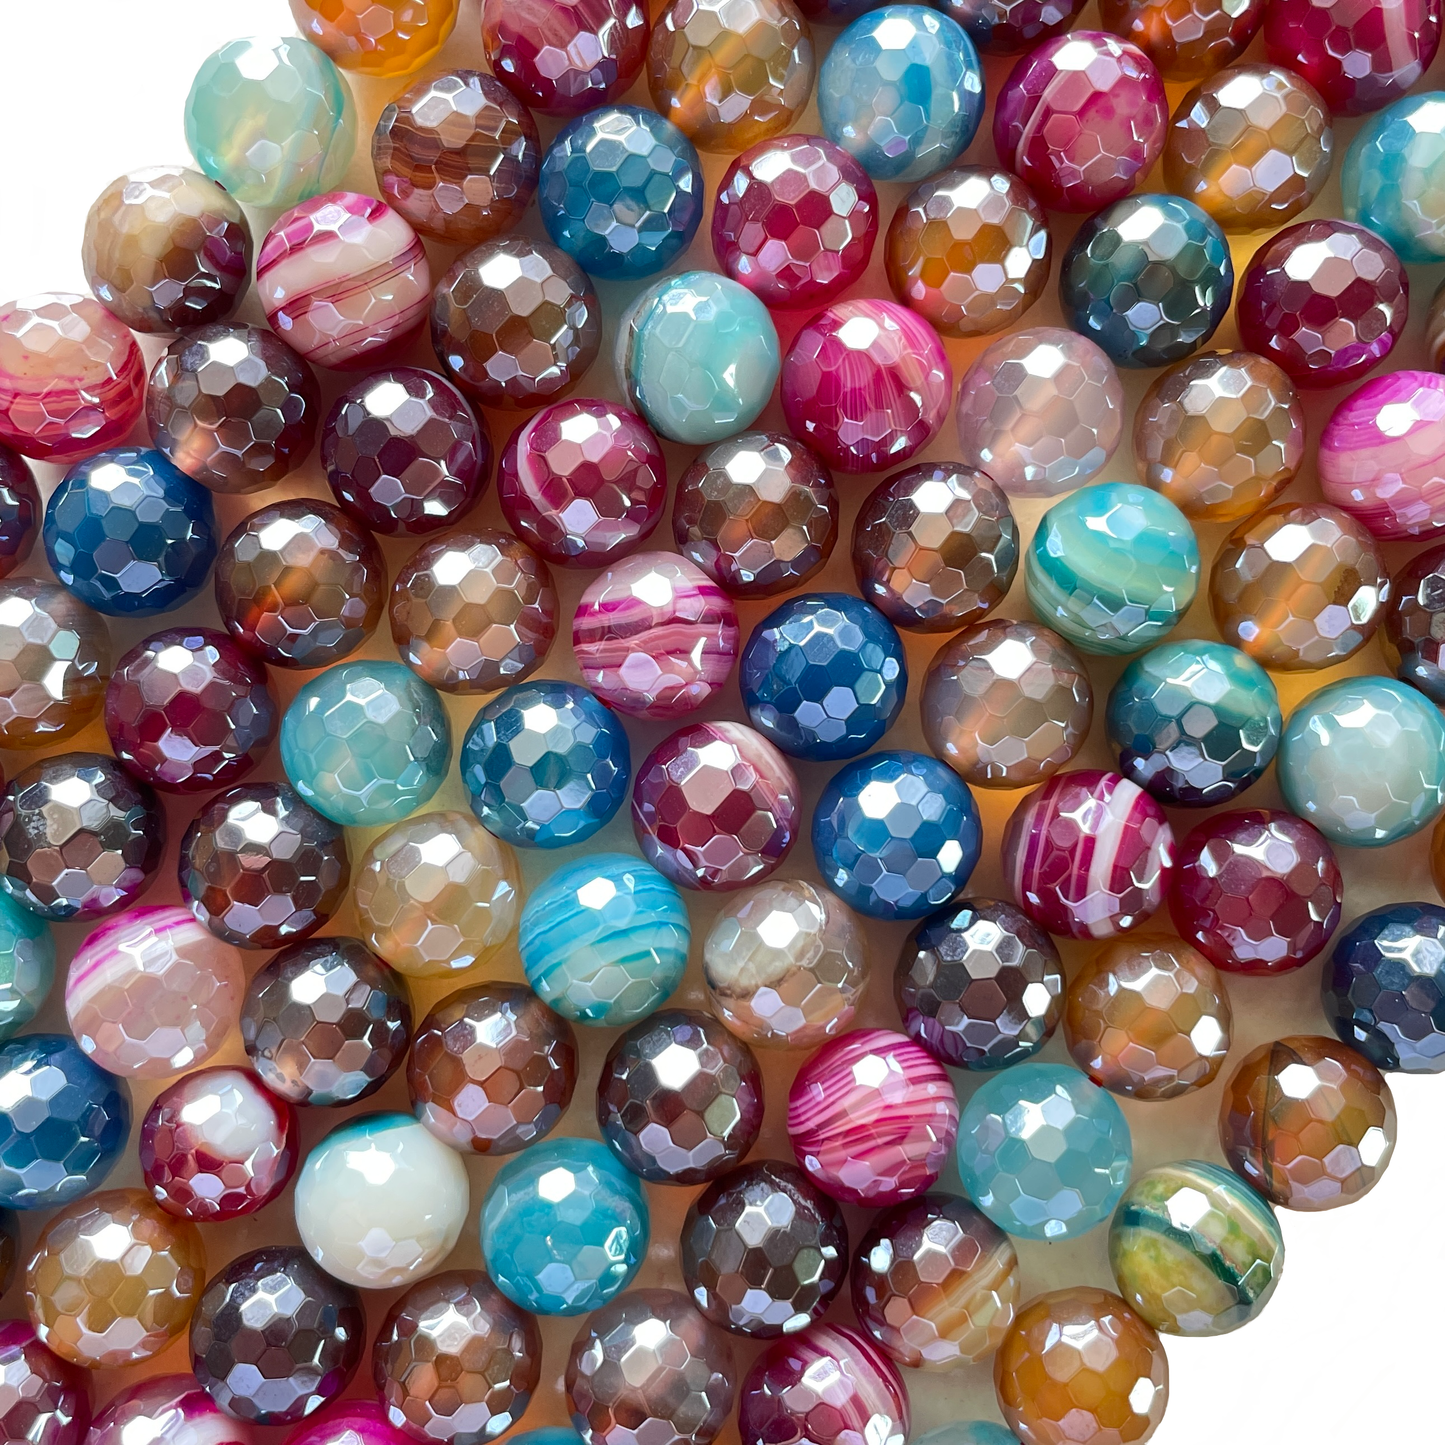 10, 12mm Electroplated Multicolor Banded Agate Stone Faceted Beads-Grade A Premium Quality Electroplated Beads 12mm Stone Beads New Beads Arrivals Premium Quality Agate Beads Charms Beads Beyond